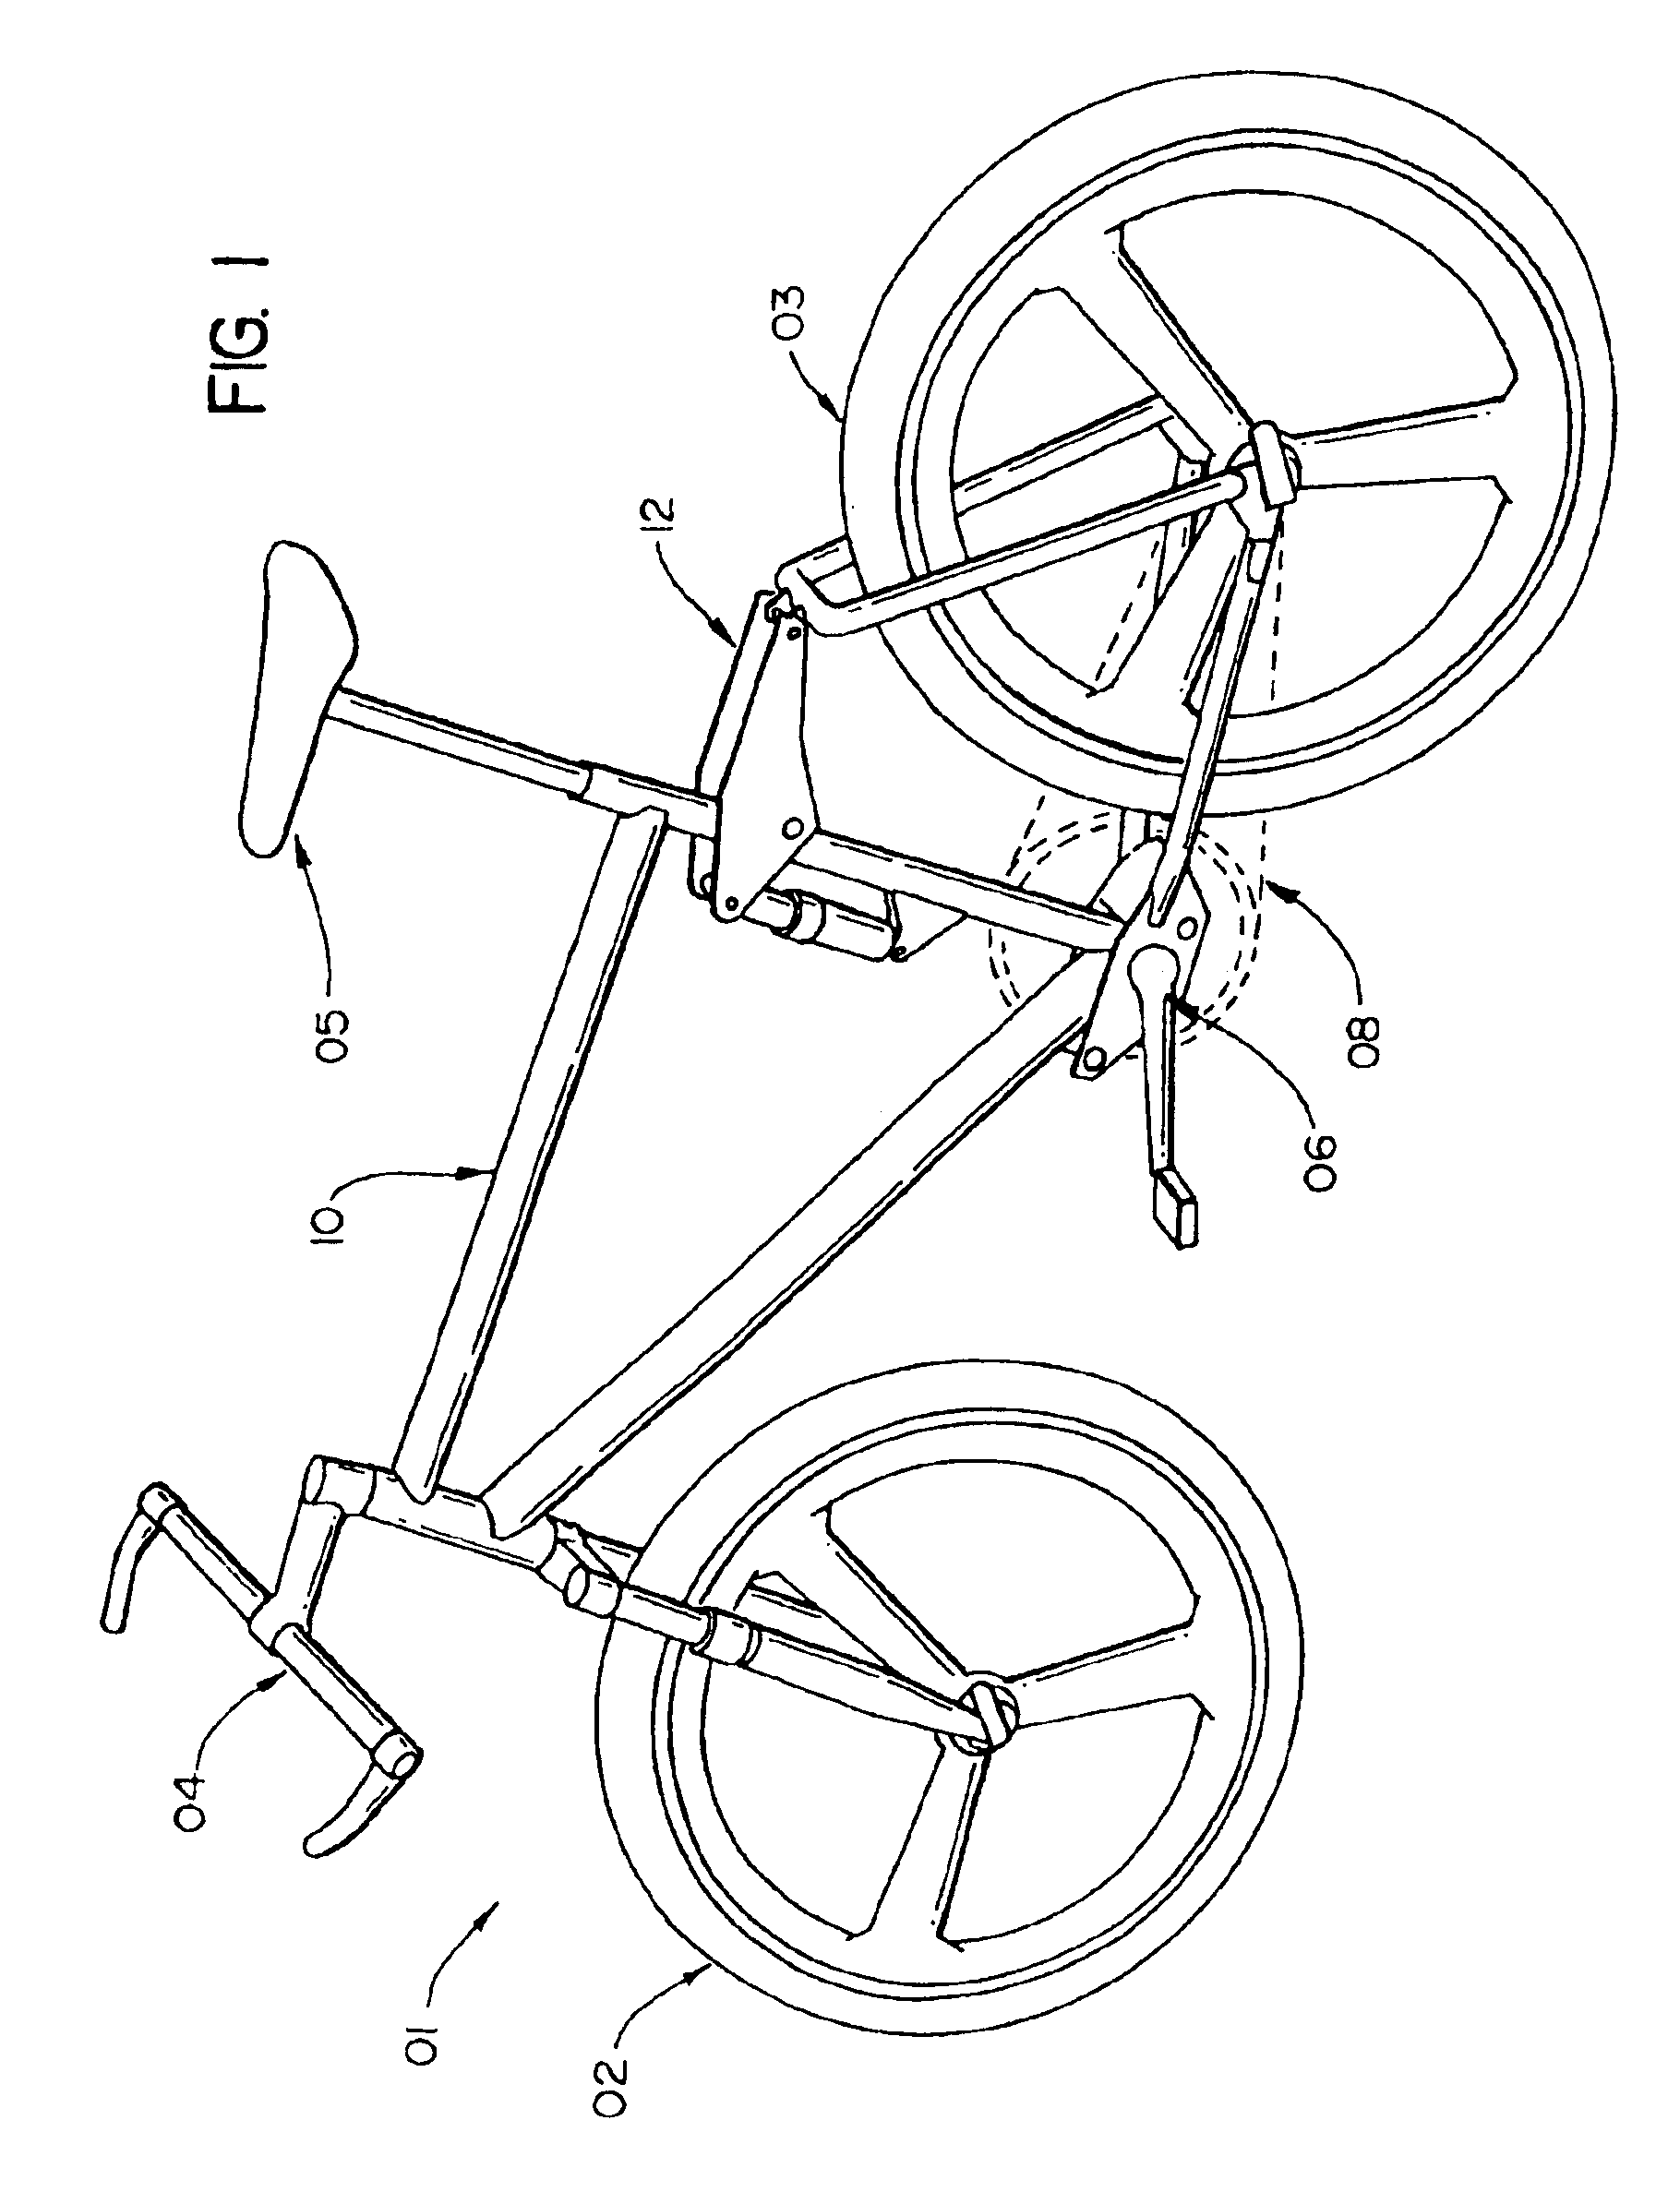 Bicycle wheel travel path for selectively applying chainstay lengthening effect and apparatus for providing same